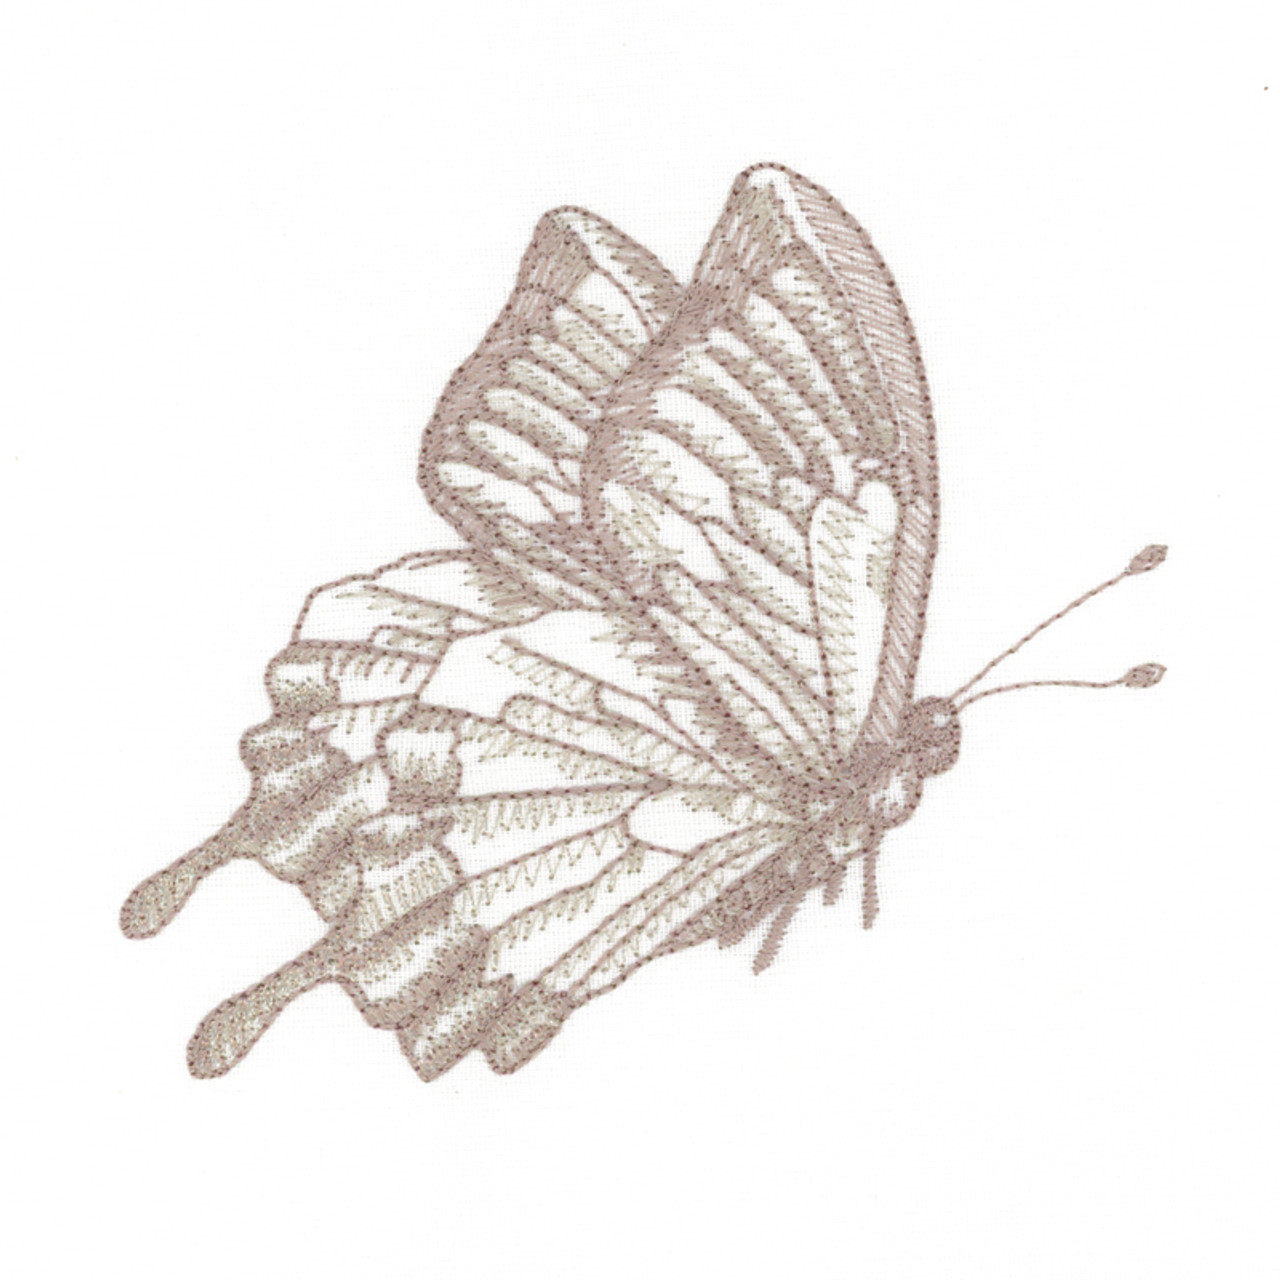 drawing pictures of butterflies